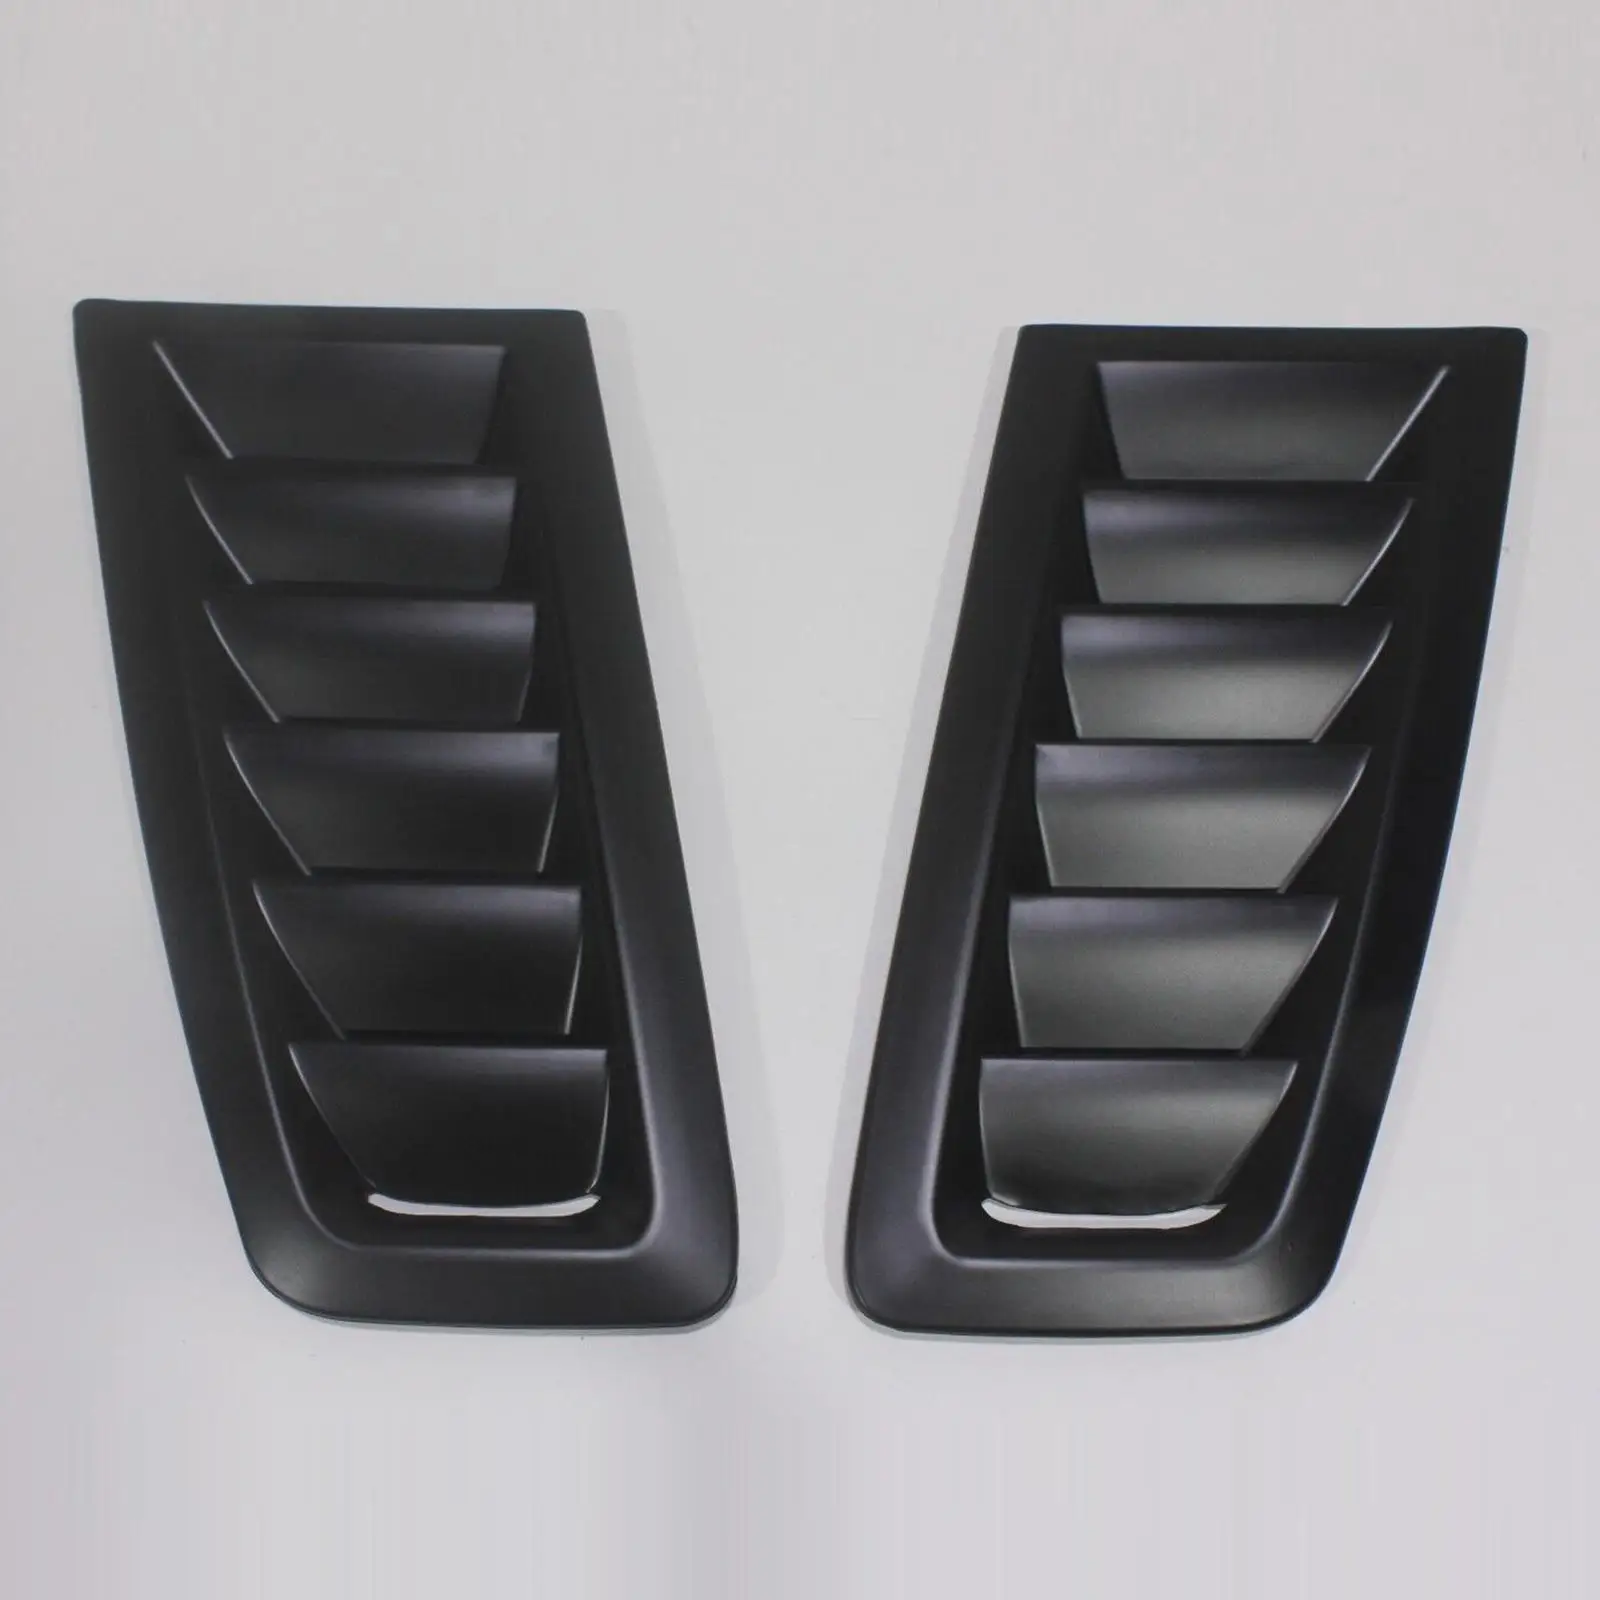 2x Hood Vent Scoop Kit Bonnet Vents Hood Trim Air Flow Intake Louvers Hood Trim Cover for Ford Focus RS Style Decorative